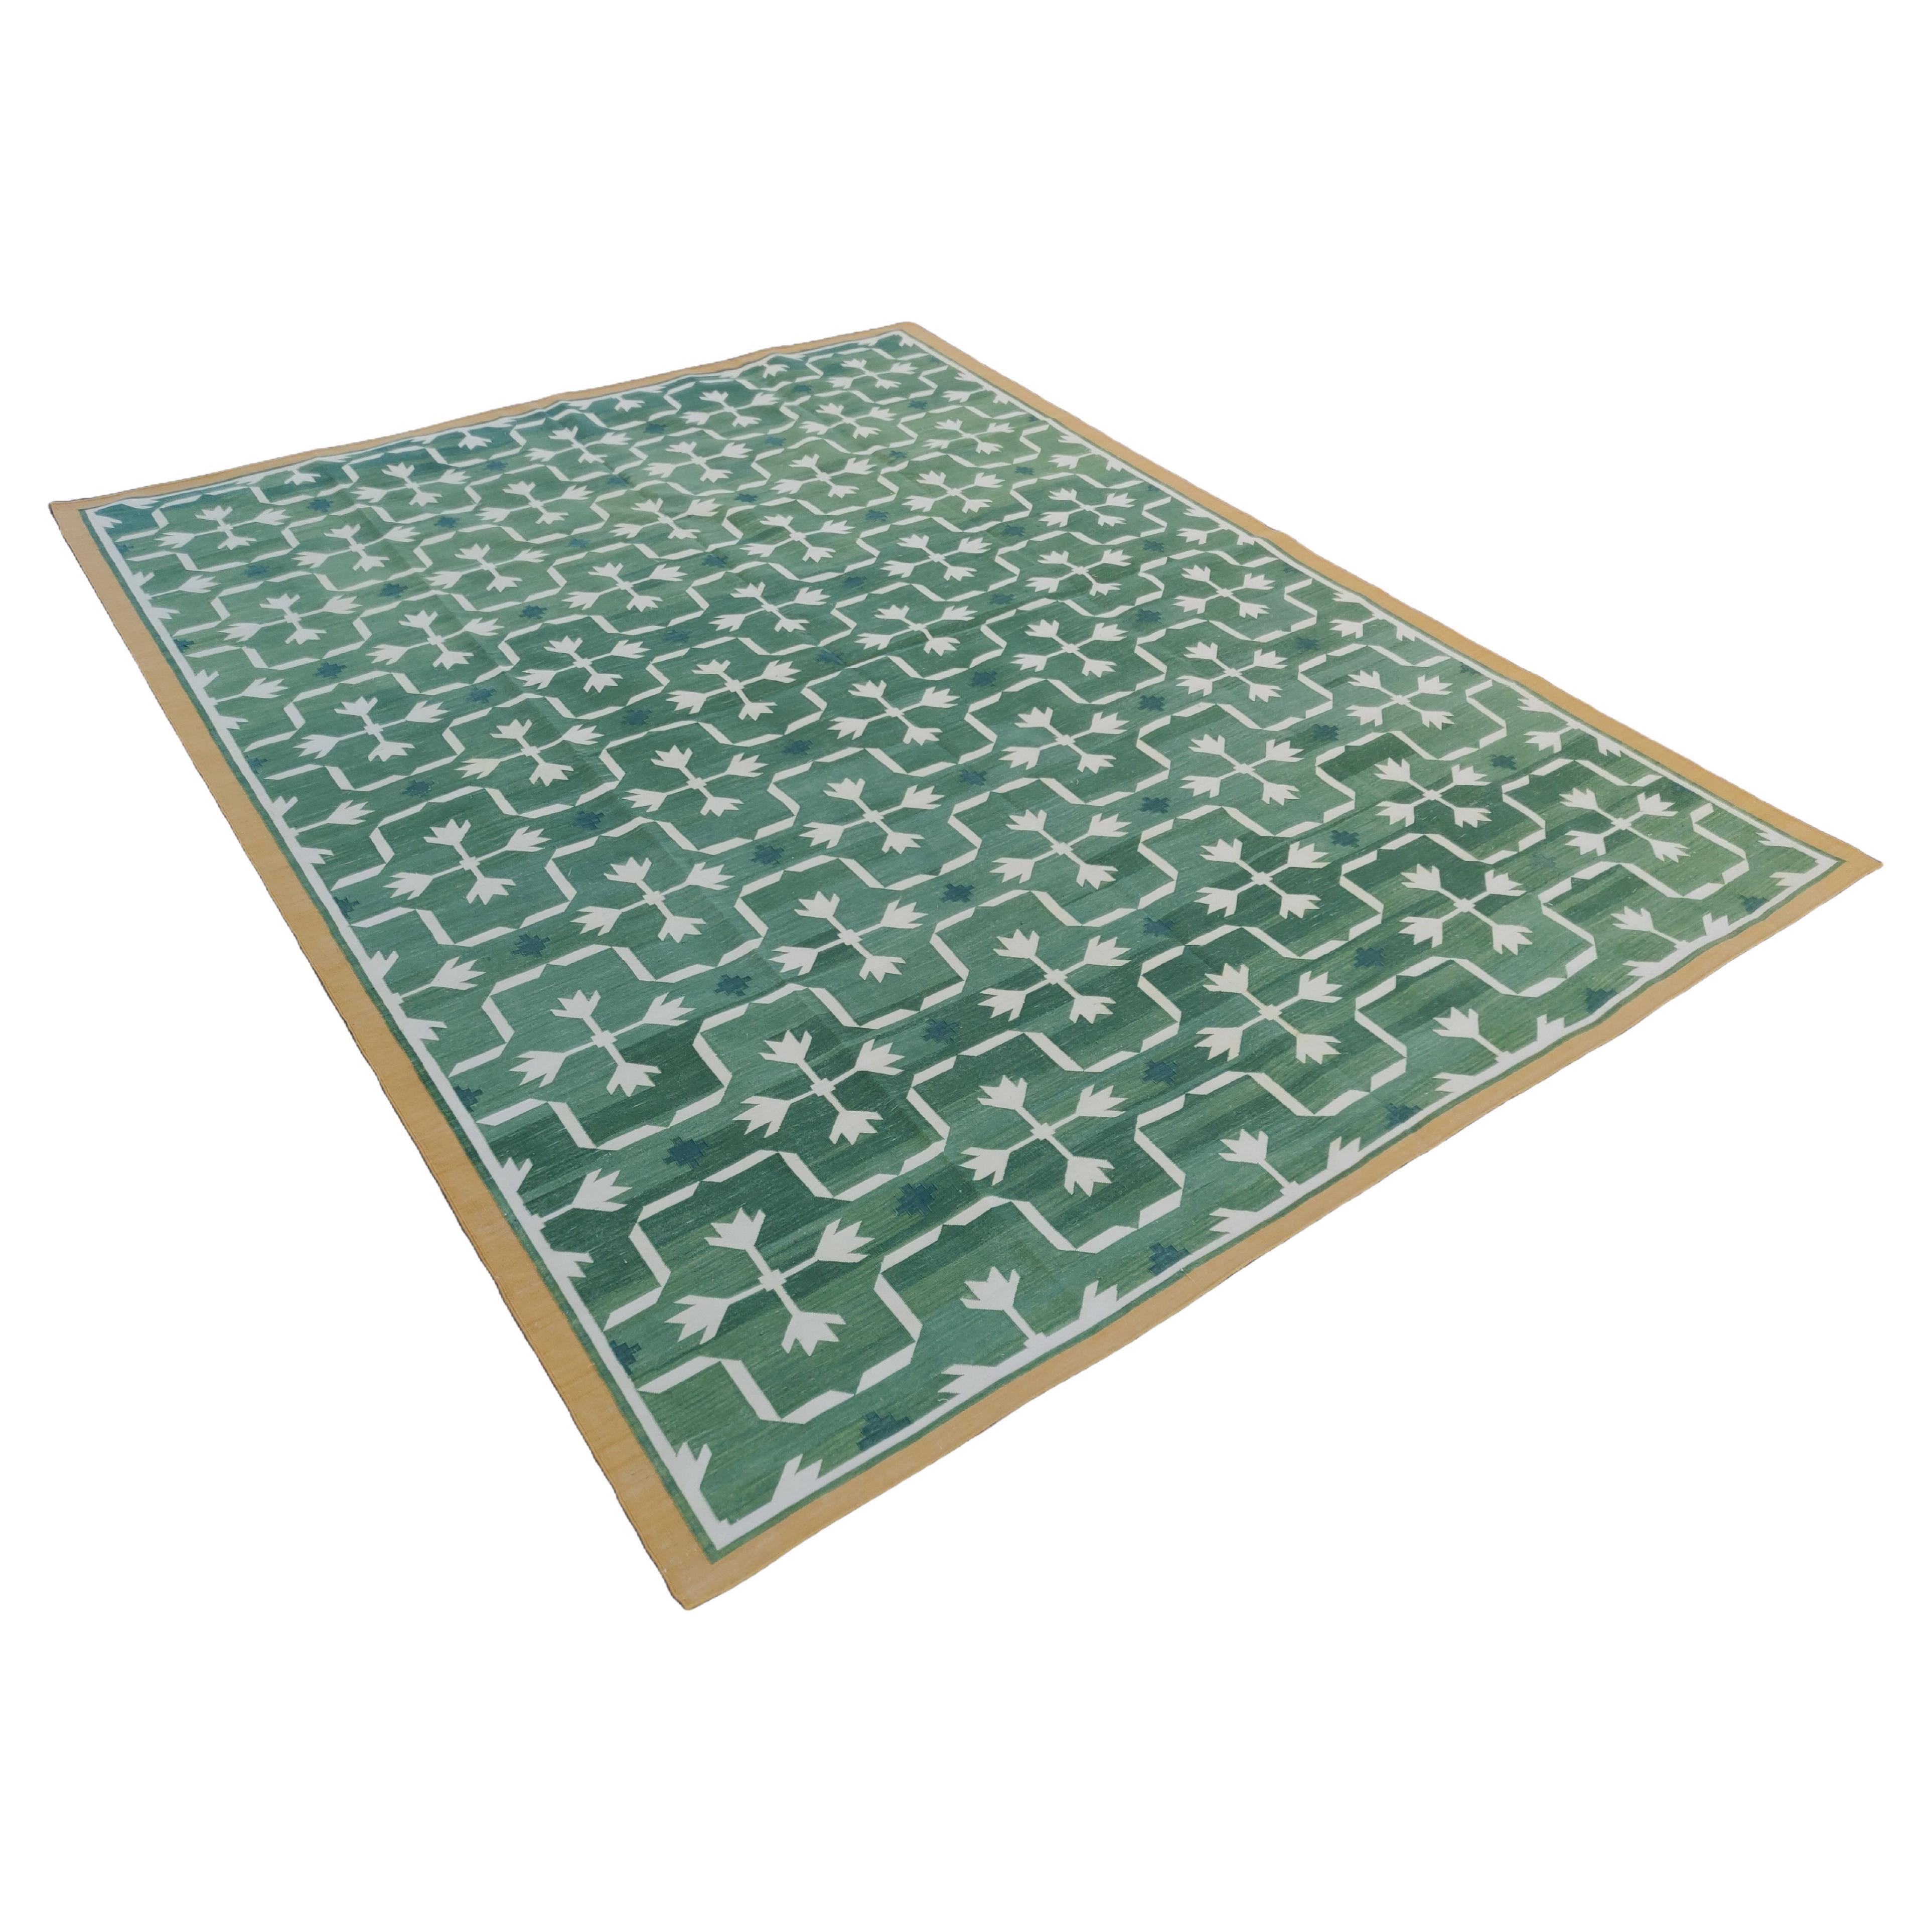 Handmade Cotton Area Flat Weave Rug, Green And White Leaf Pattern Indian Dhurrie